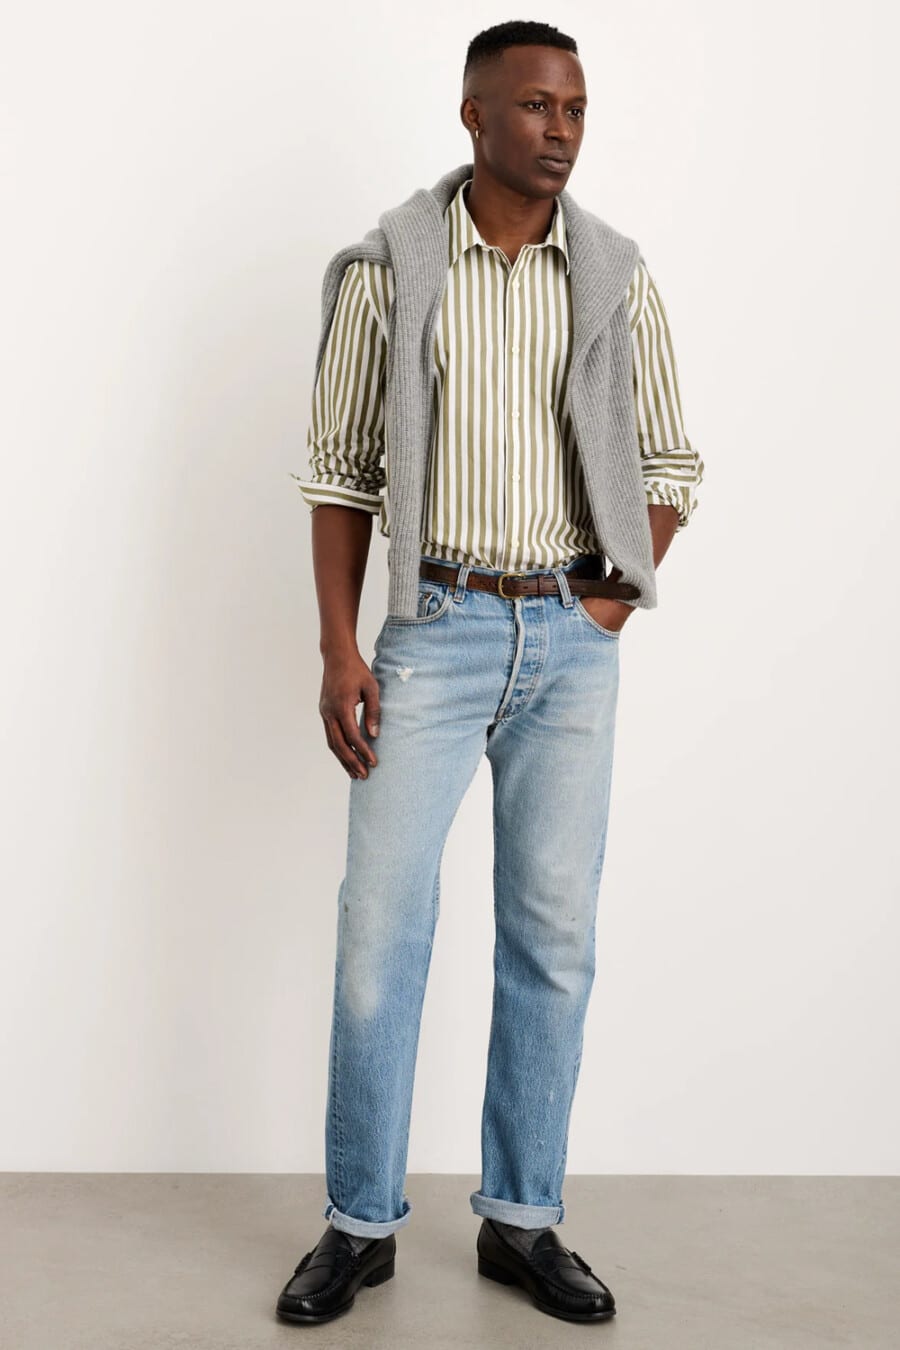 Men's light wash jeans, green/white stripe shirt, black leather penny loafers and grey ribbed sweater outfit